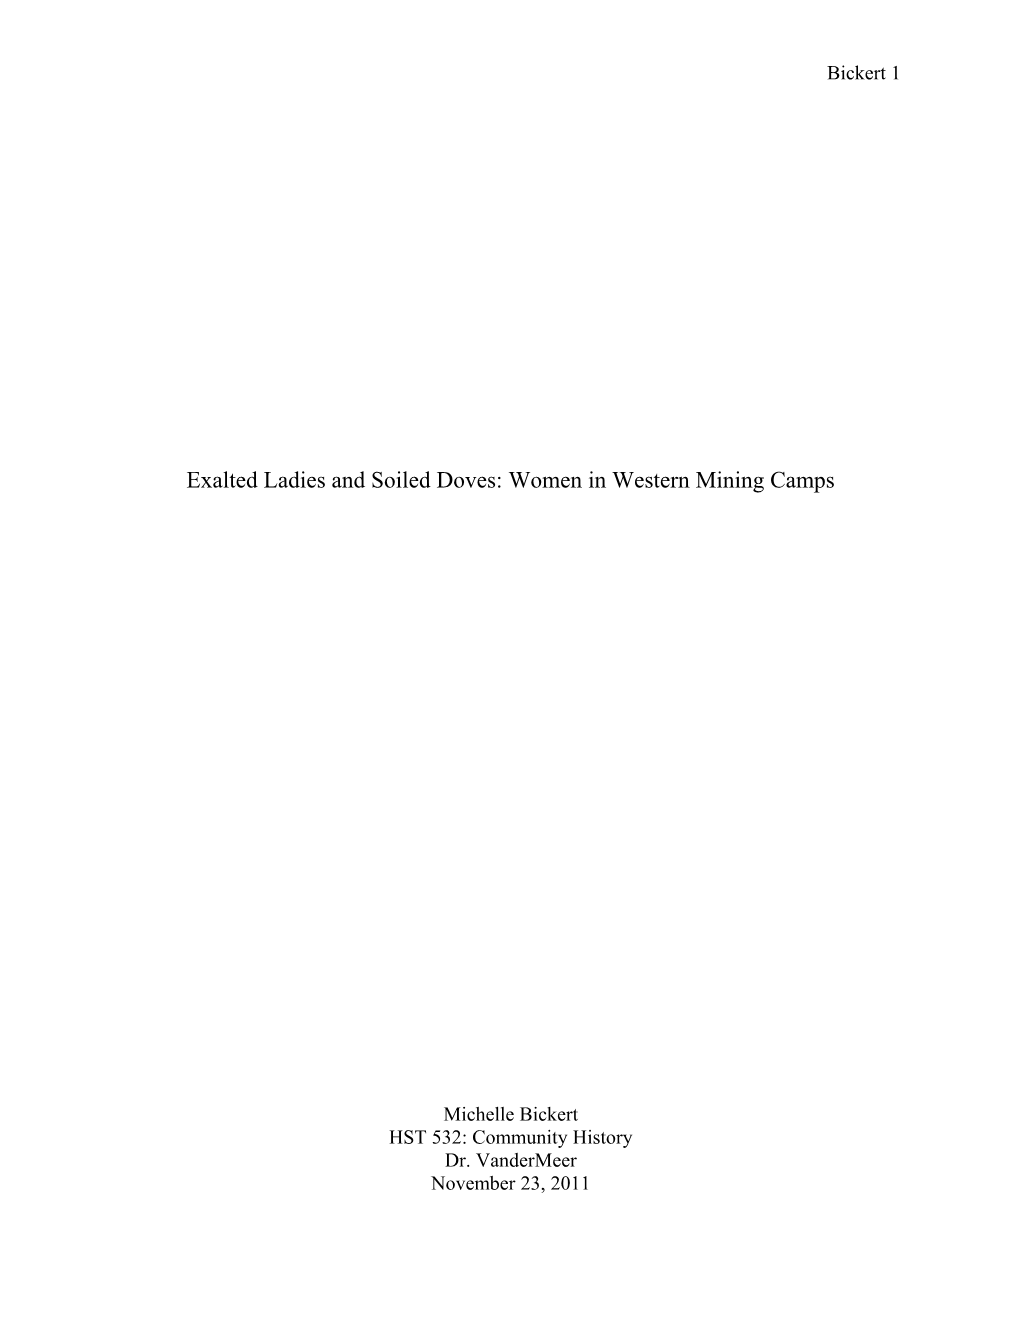 Exalted Ladies and Soiled Doves: Women in Western Mining Camps